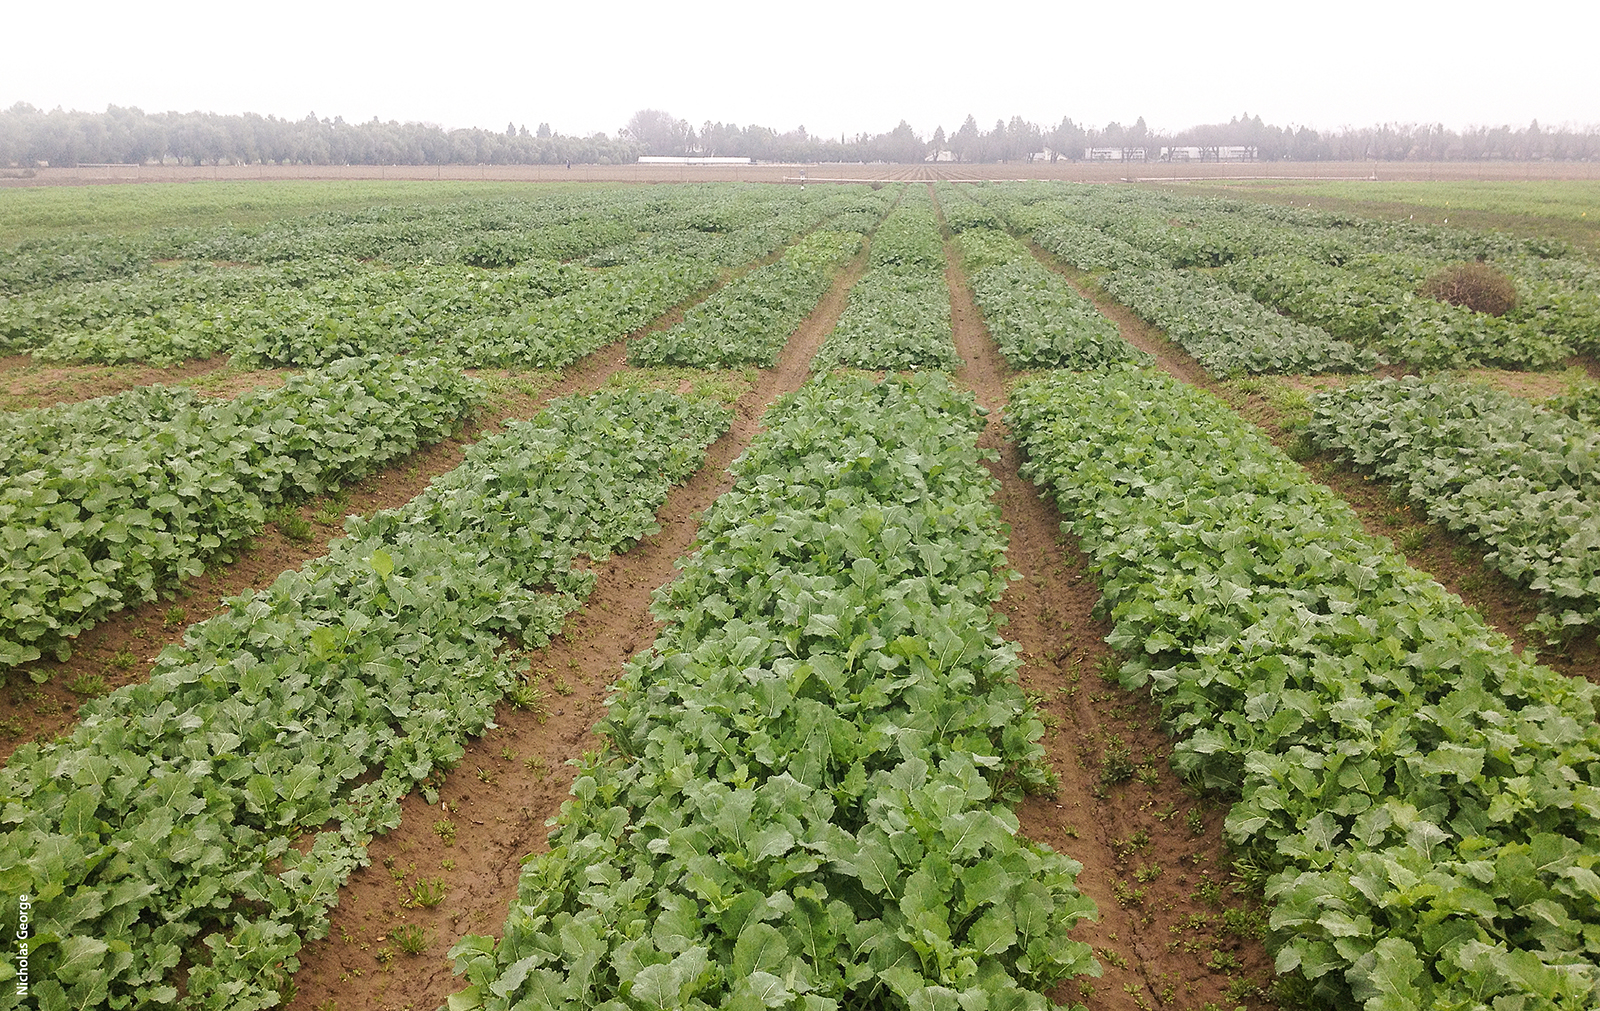 A variety trial of canola several weeks after sowing at UC Davis. Researchers predict that canola yield in the Sacramento Valley could be over 3,100 pounds per acre under rain-fed production, which would make it economically competitive with wheat in the region.